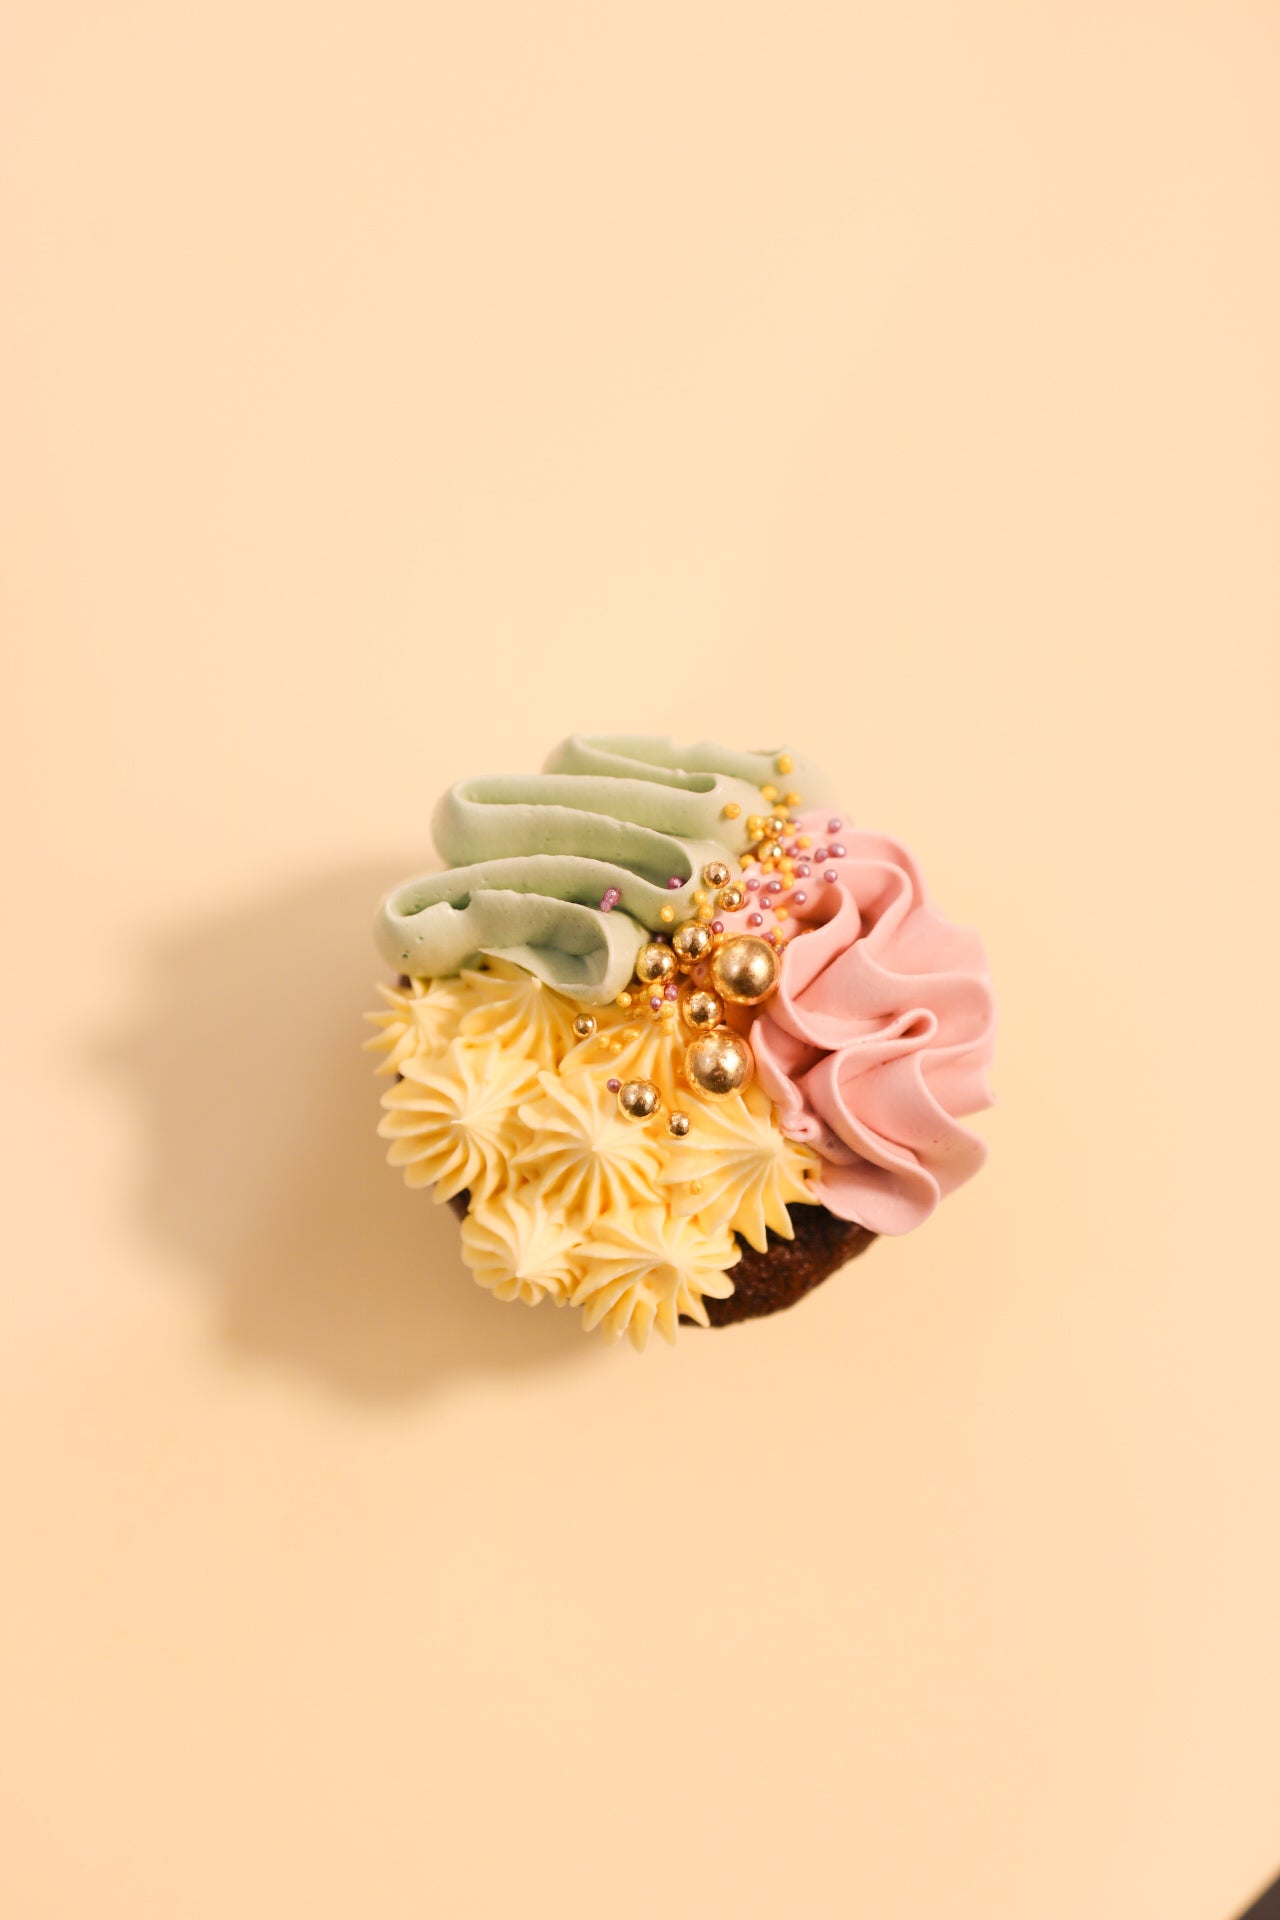 Decoorated Cupcakes (Pastel Shades A)